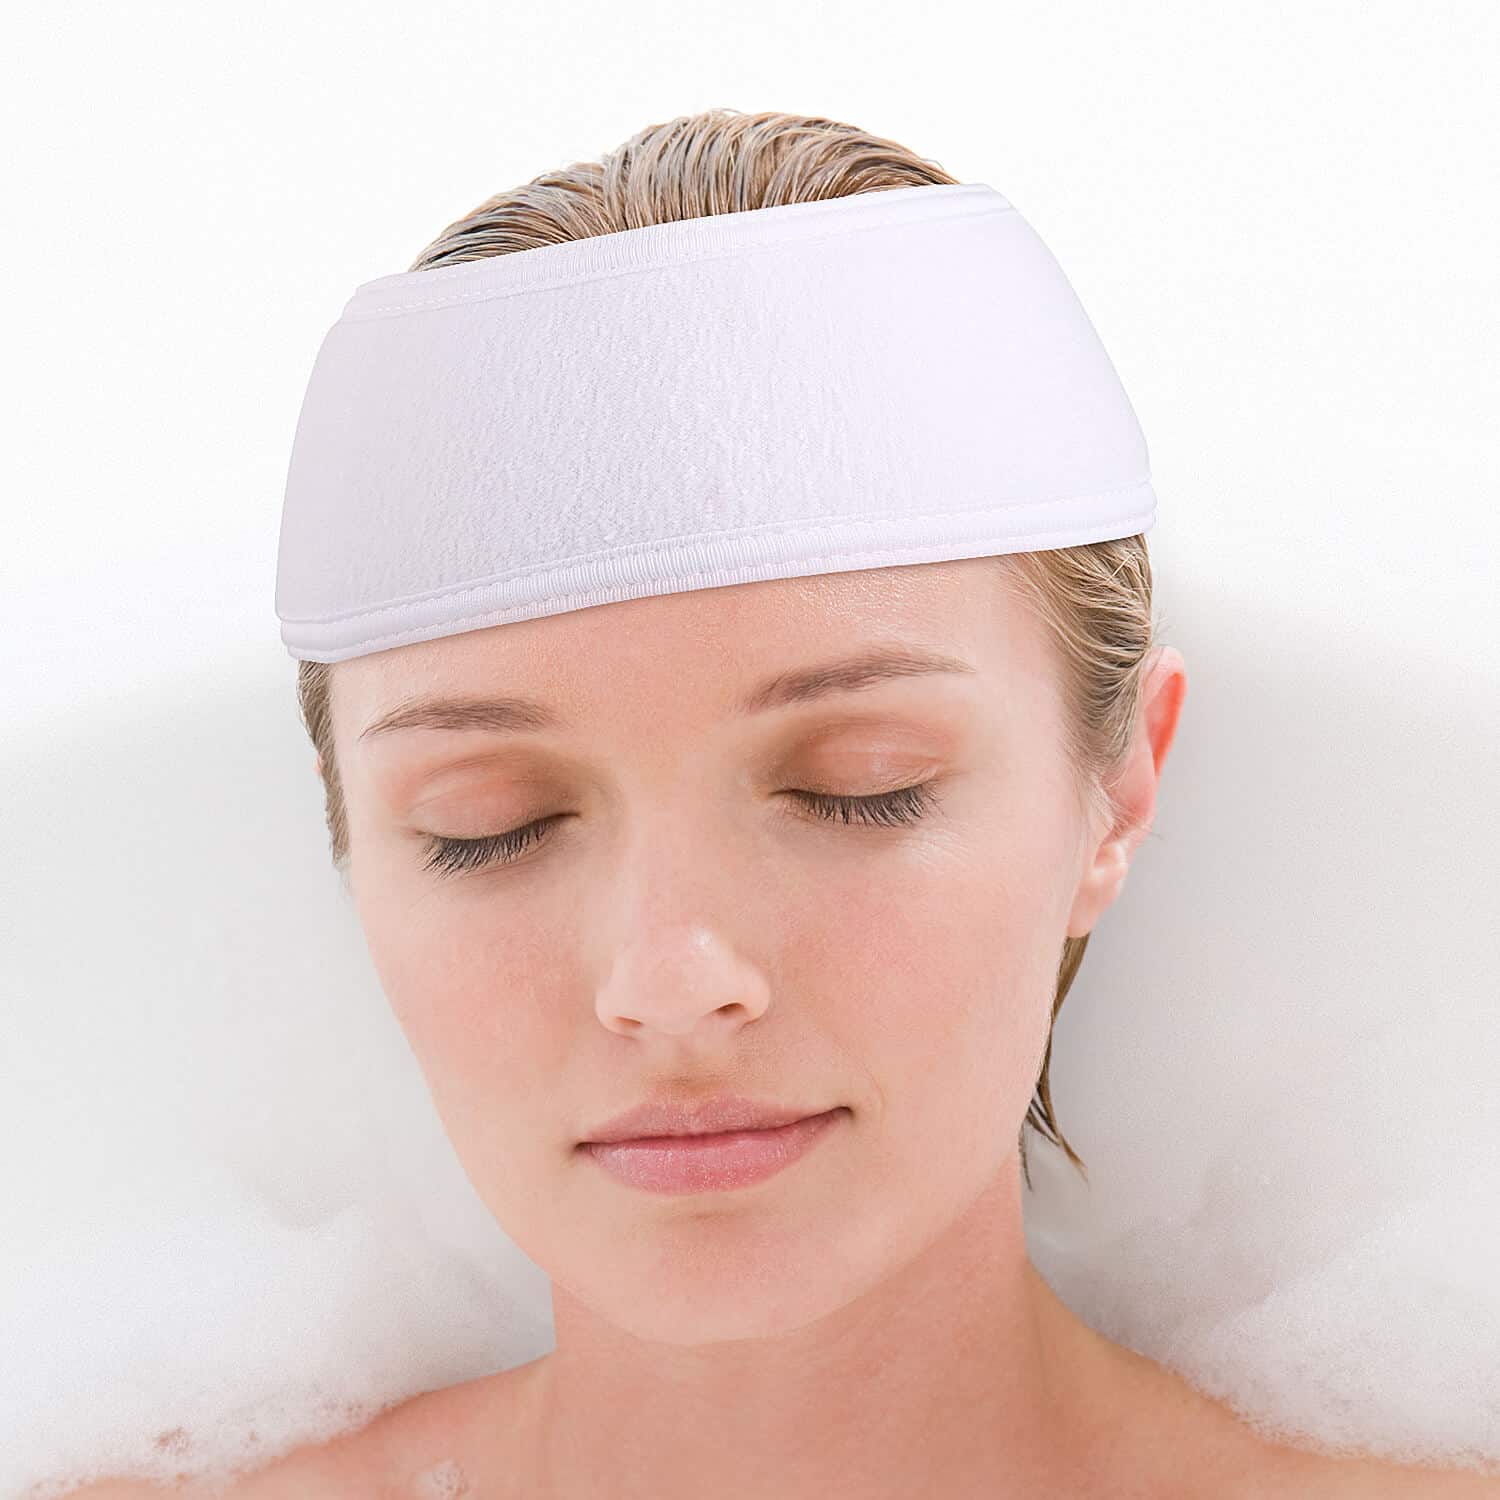 women spa headband stretchable hair band for makeup washing cosmetic shower